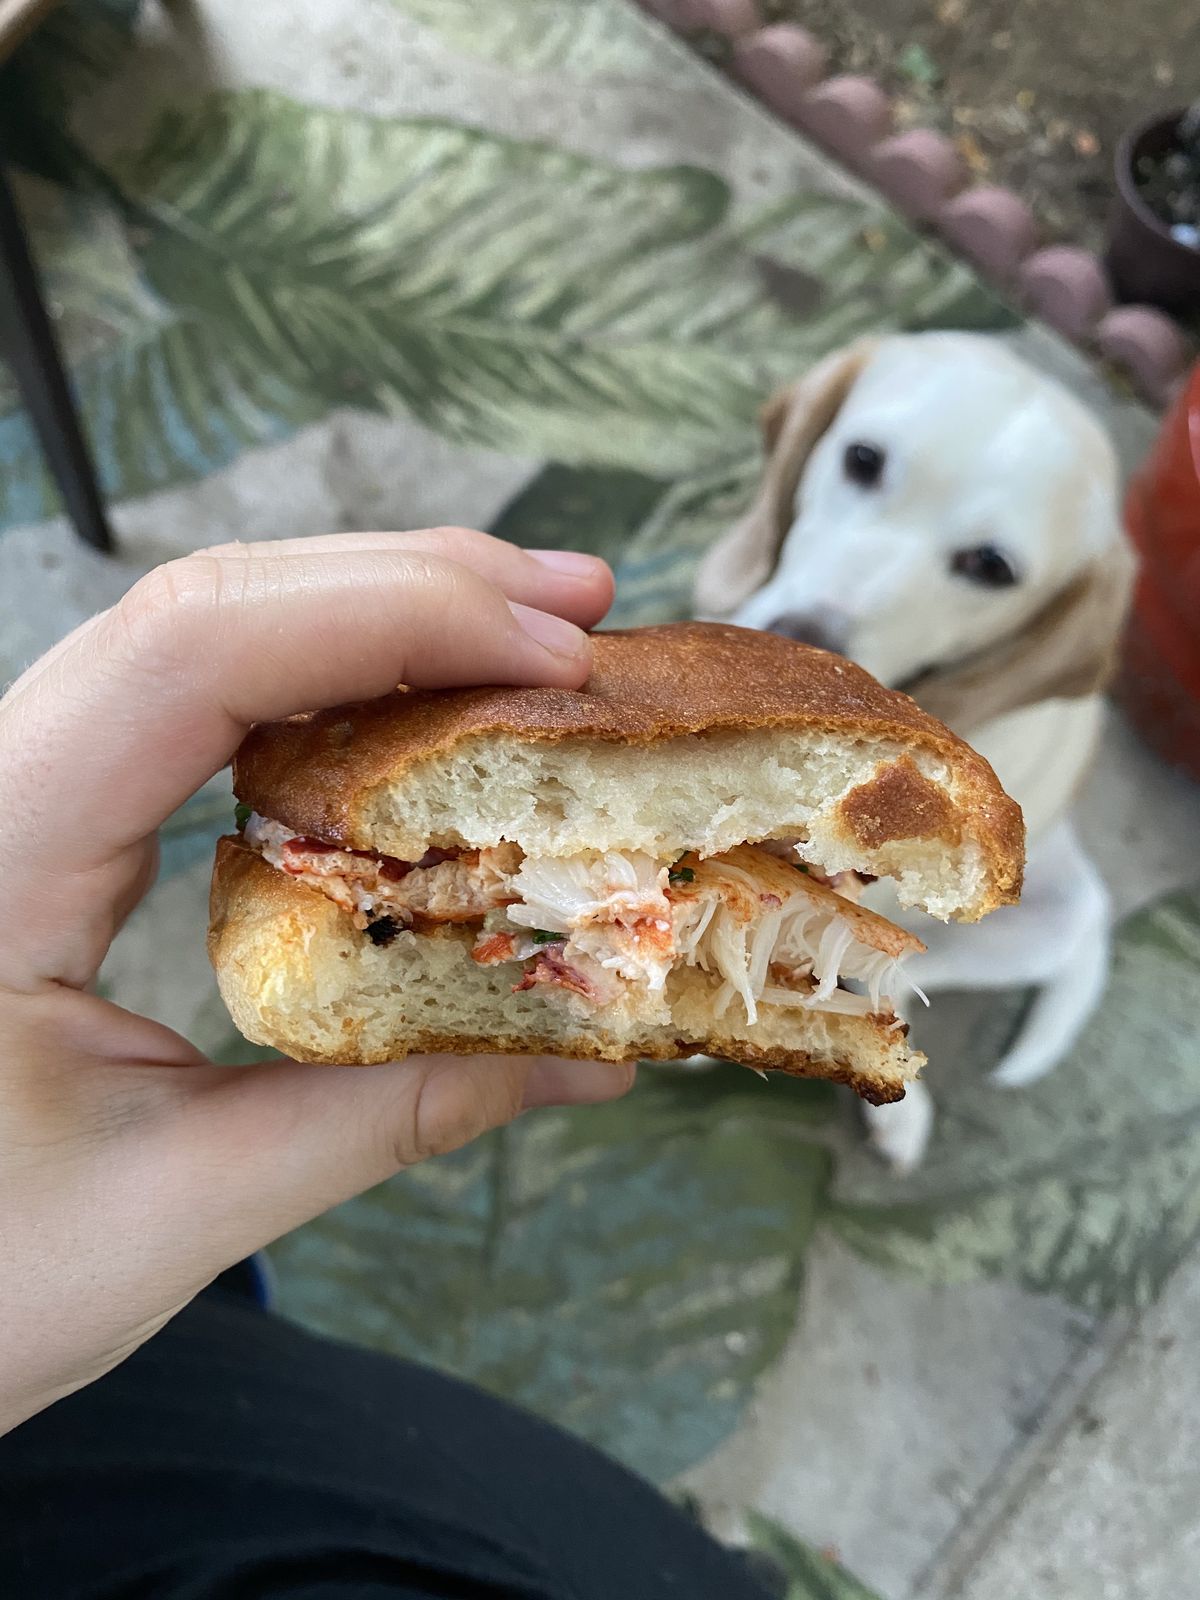 A bitten-into sandwich is in the foreground with a dog watching in the backround.